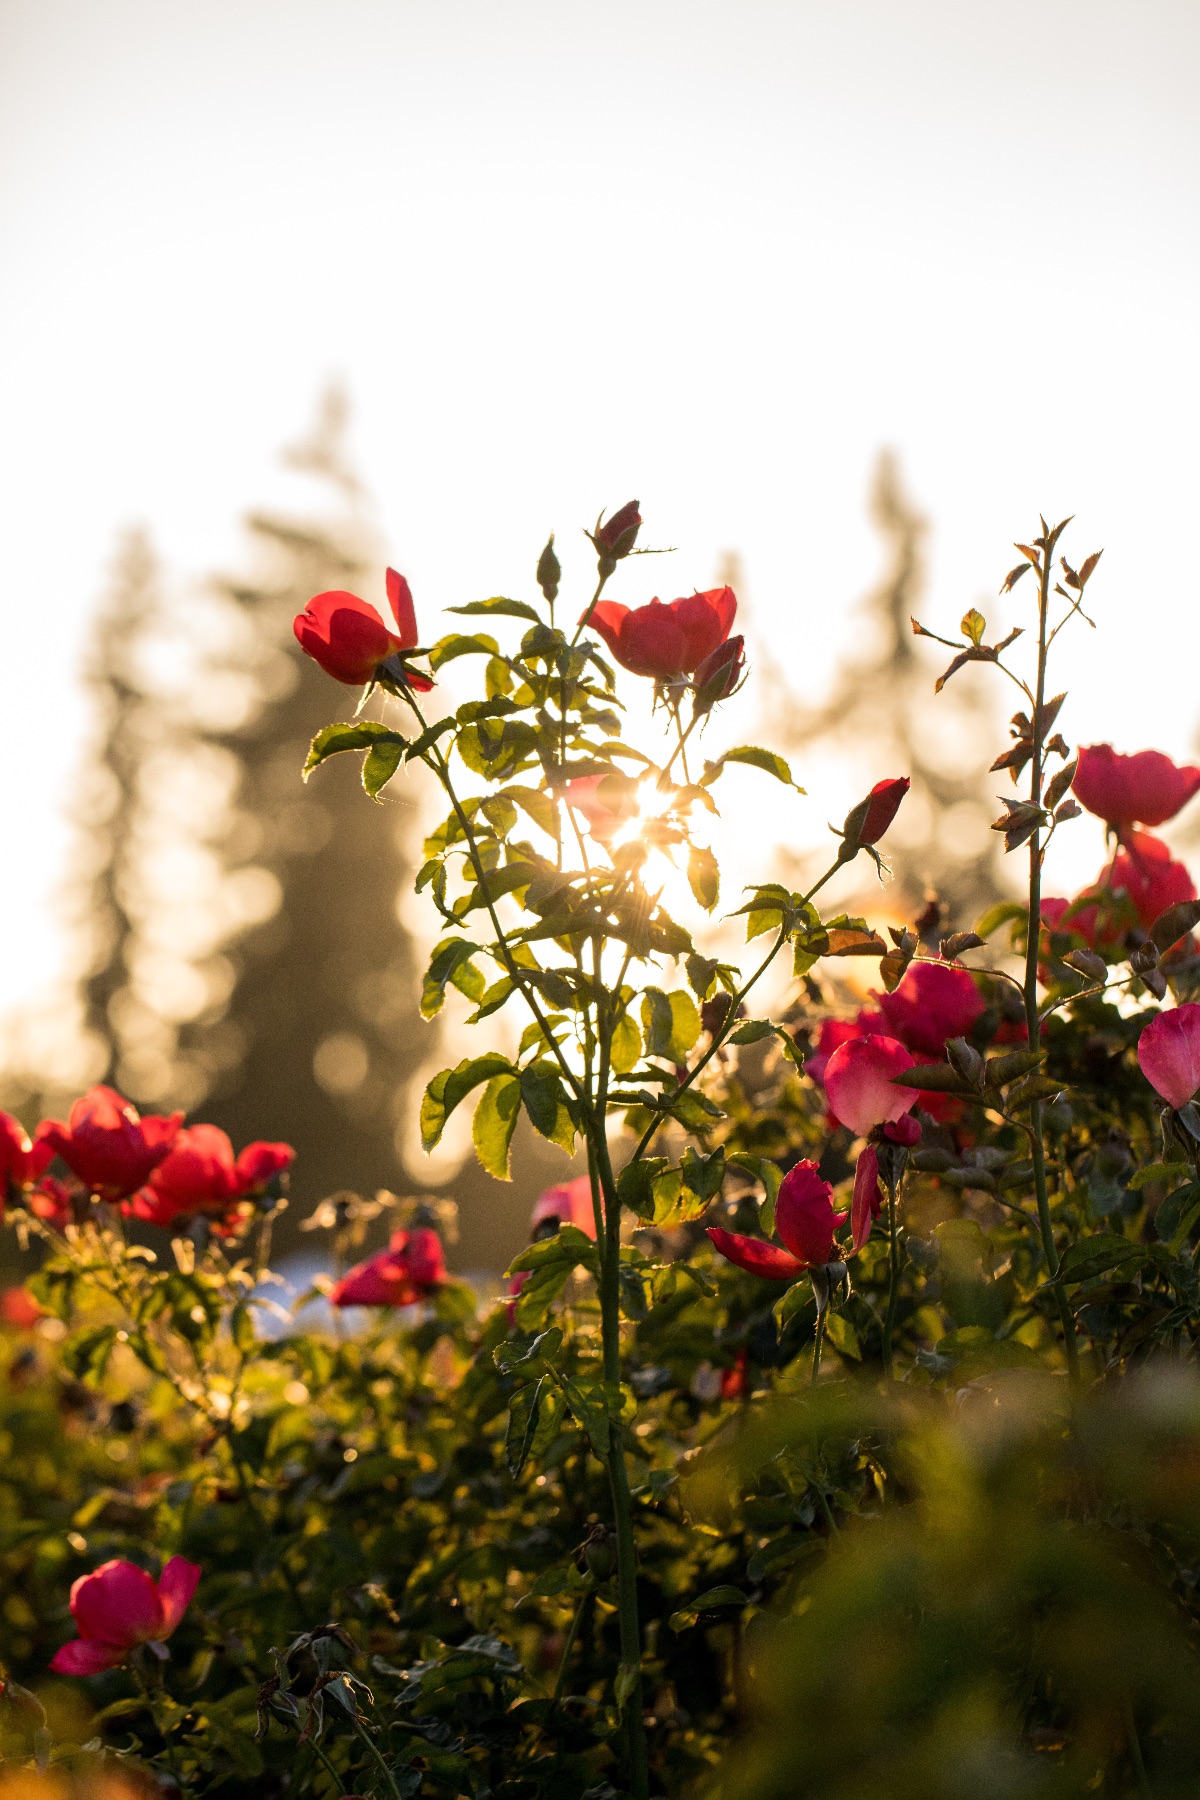 How To Use Rose for Grief Support | Herbal Academy | Rose has many uses during states of grief. Learn how rose can soothe the human spirit during grief as well as some simple recipes for use in this post.